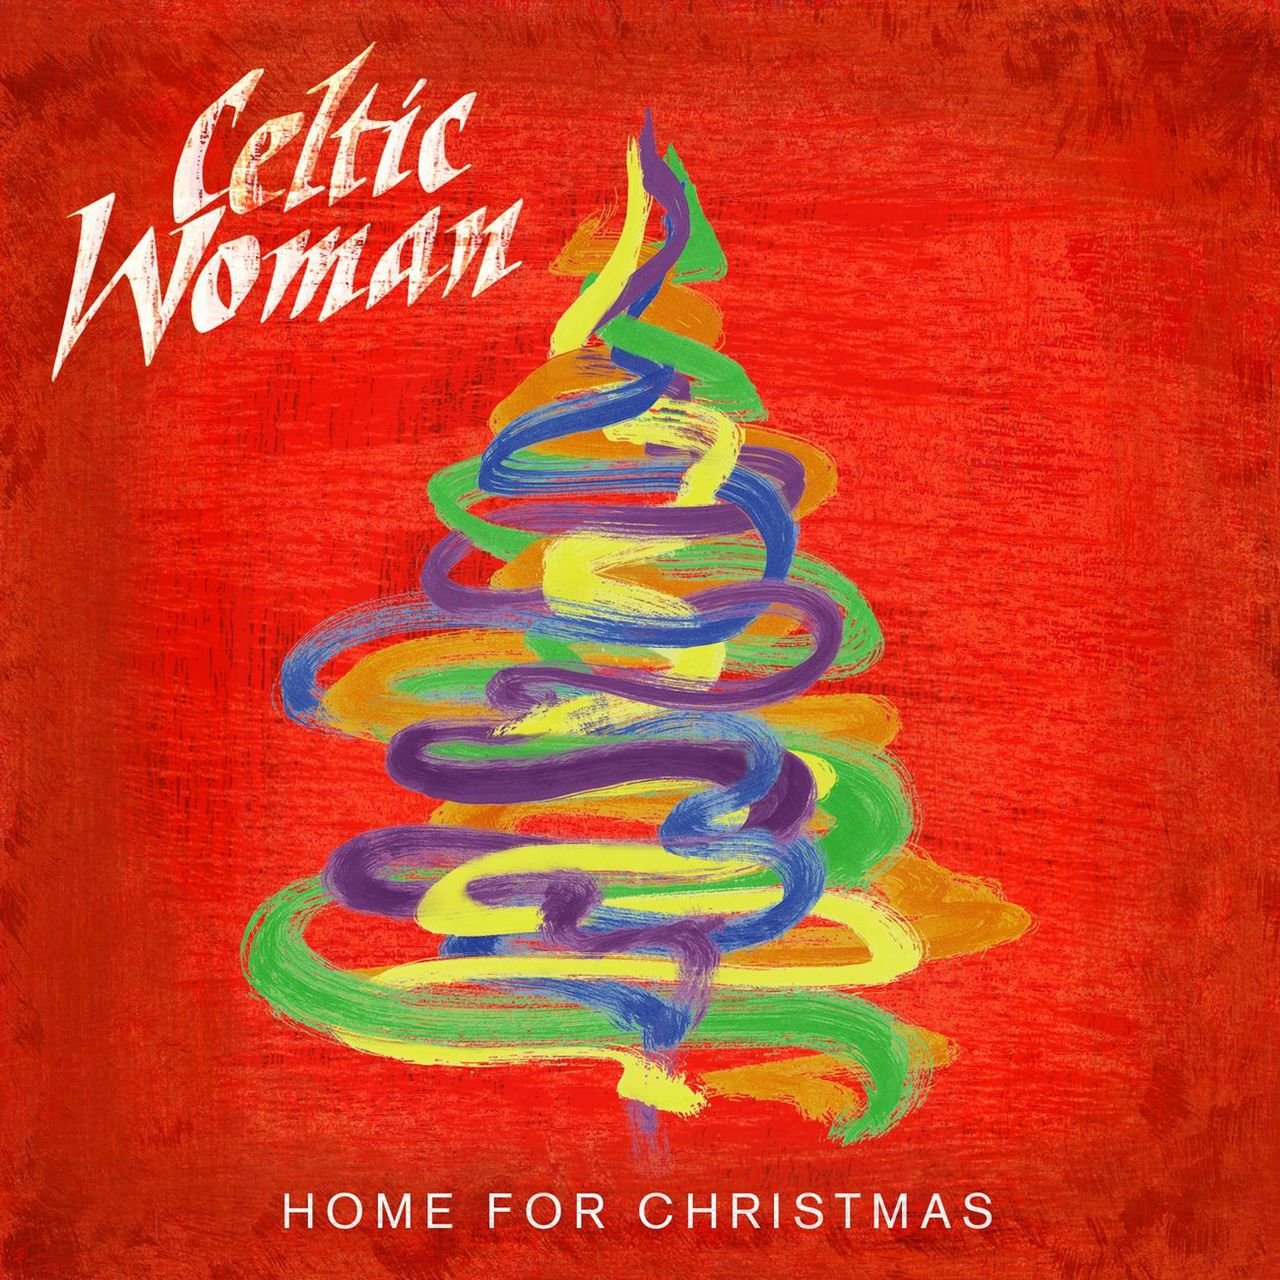 Celtic Woman — Joy To The World cover artwork